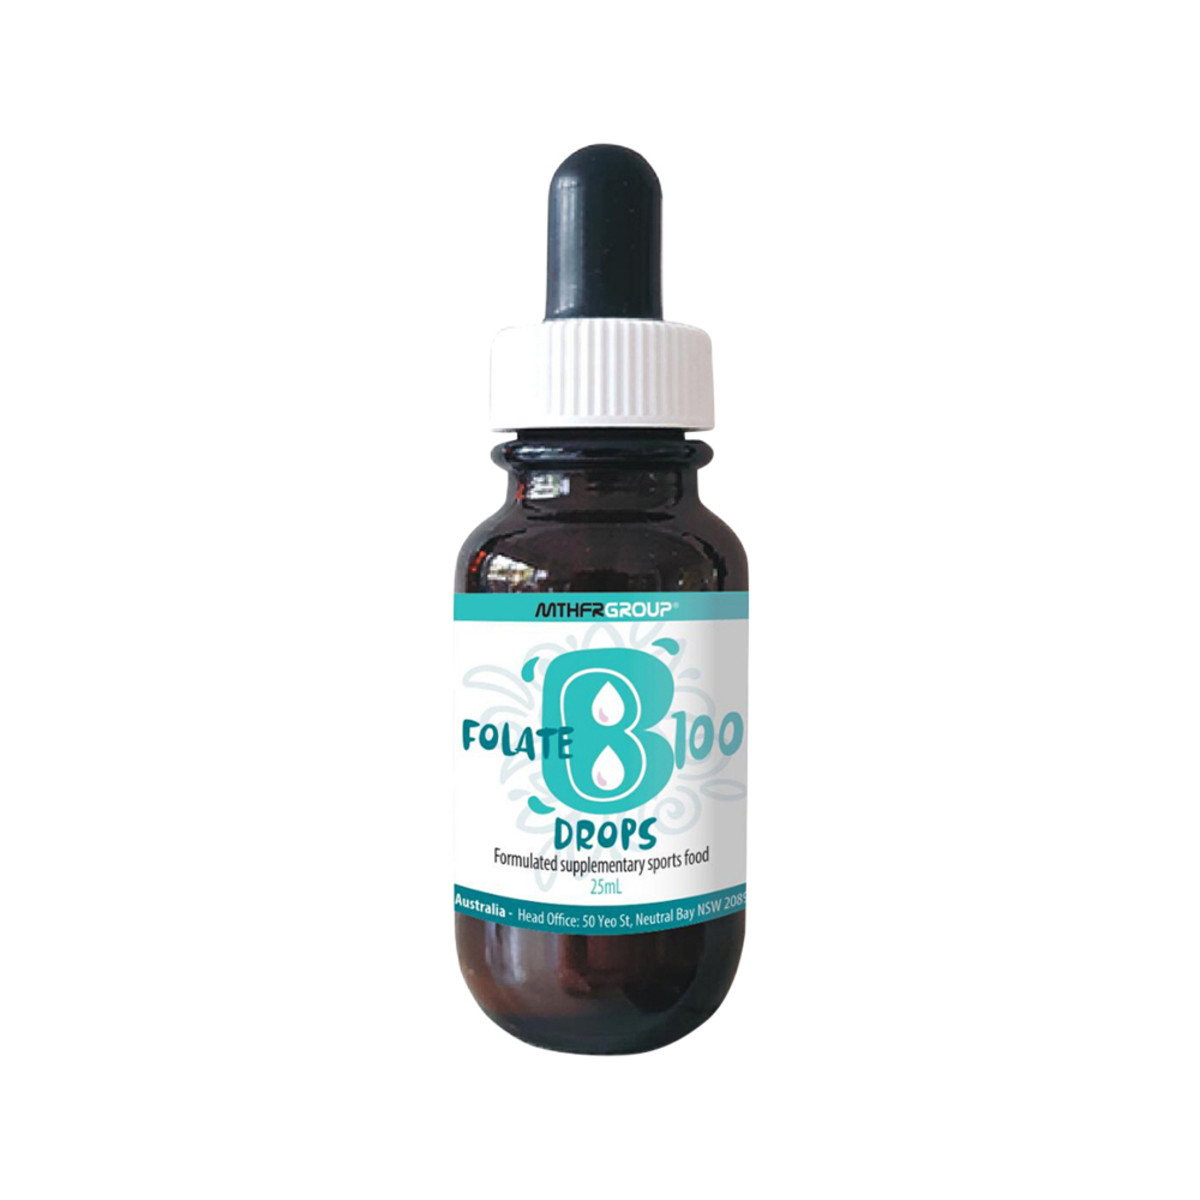 MTHFR GROUP - Wellbeing Folate B9